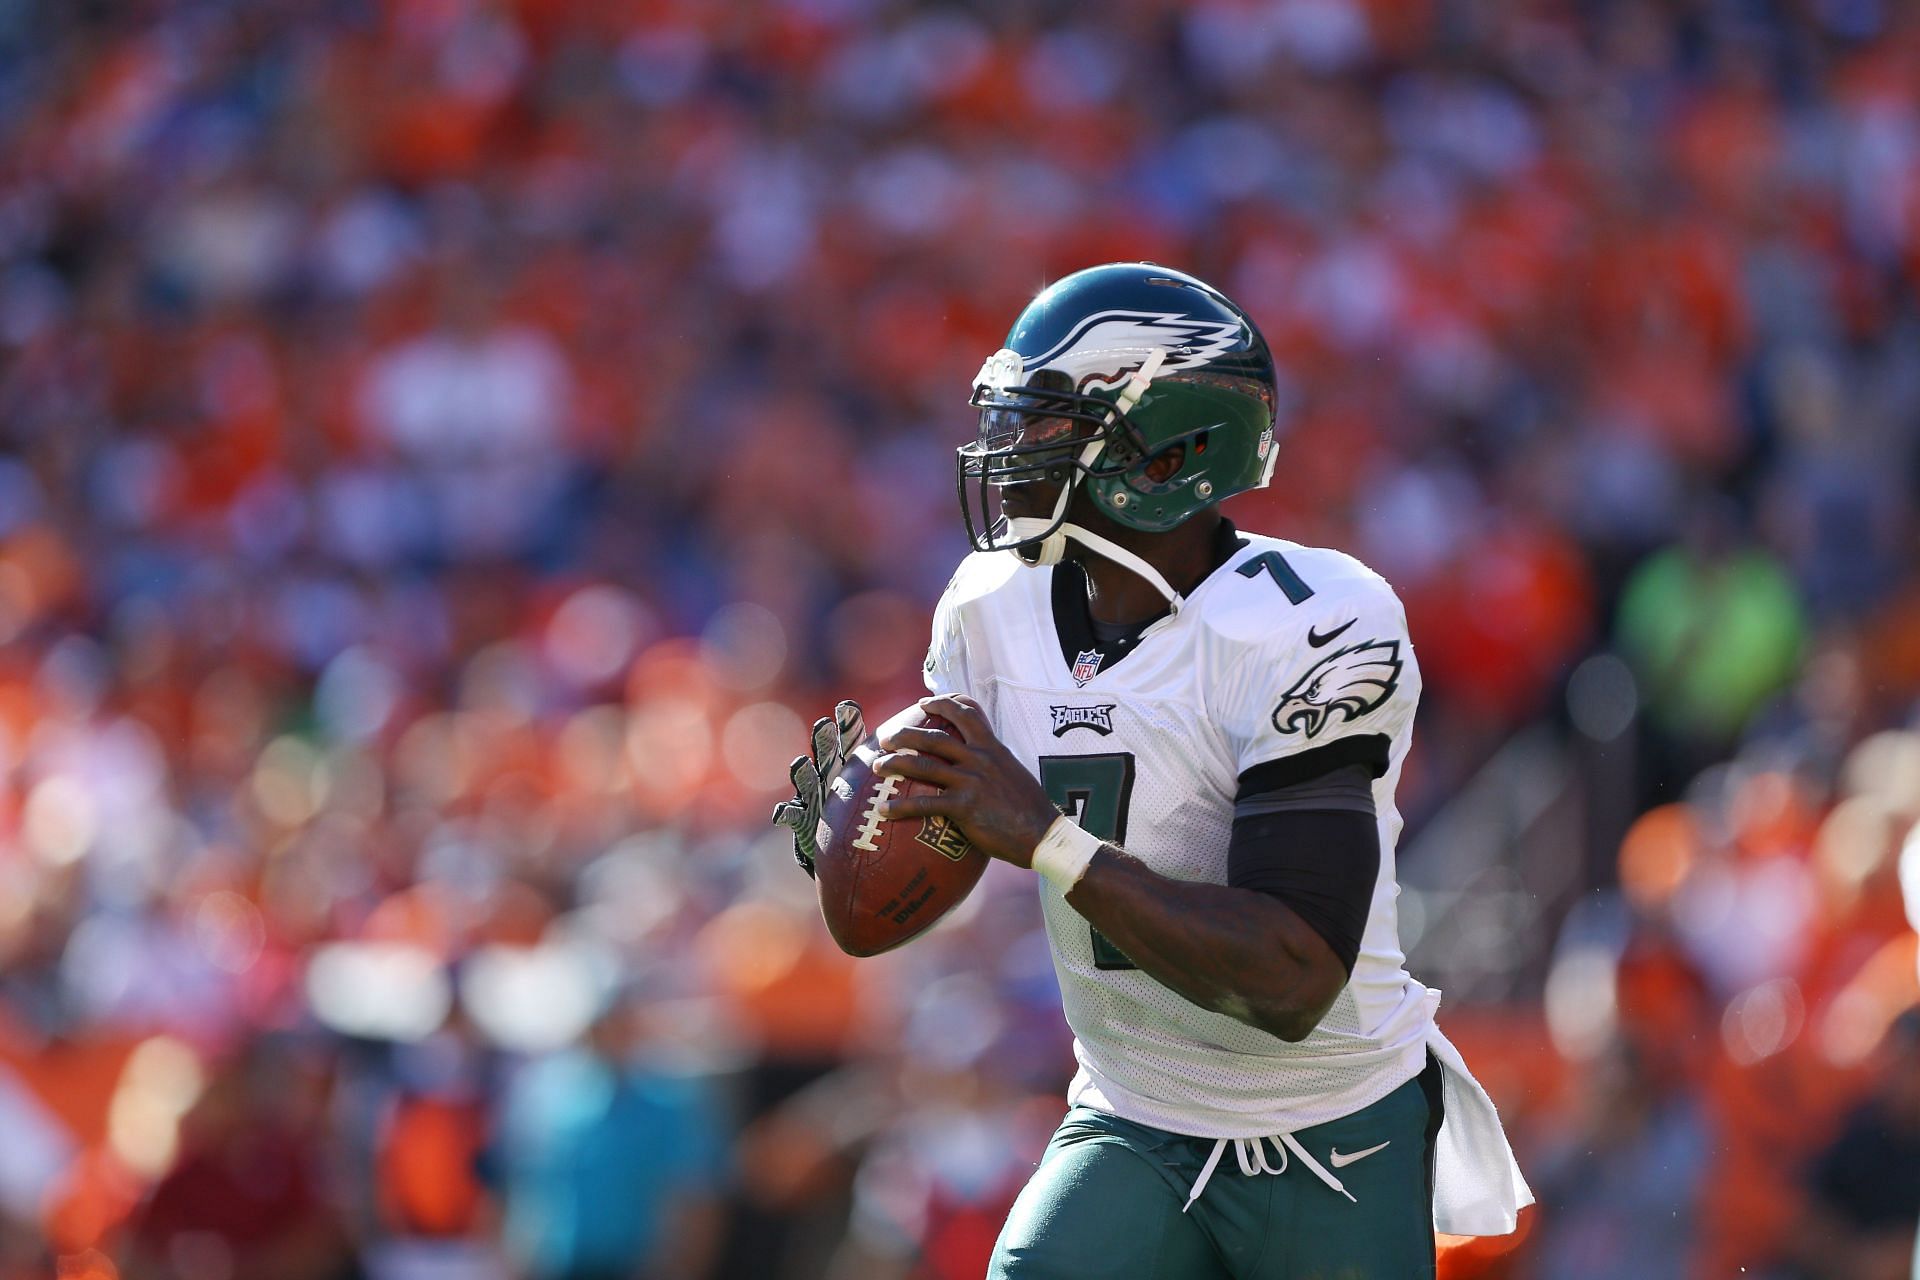 NFL teams were split on whether the Philadelphia Eagles should have given Michael Vick a path to return